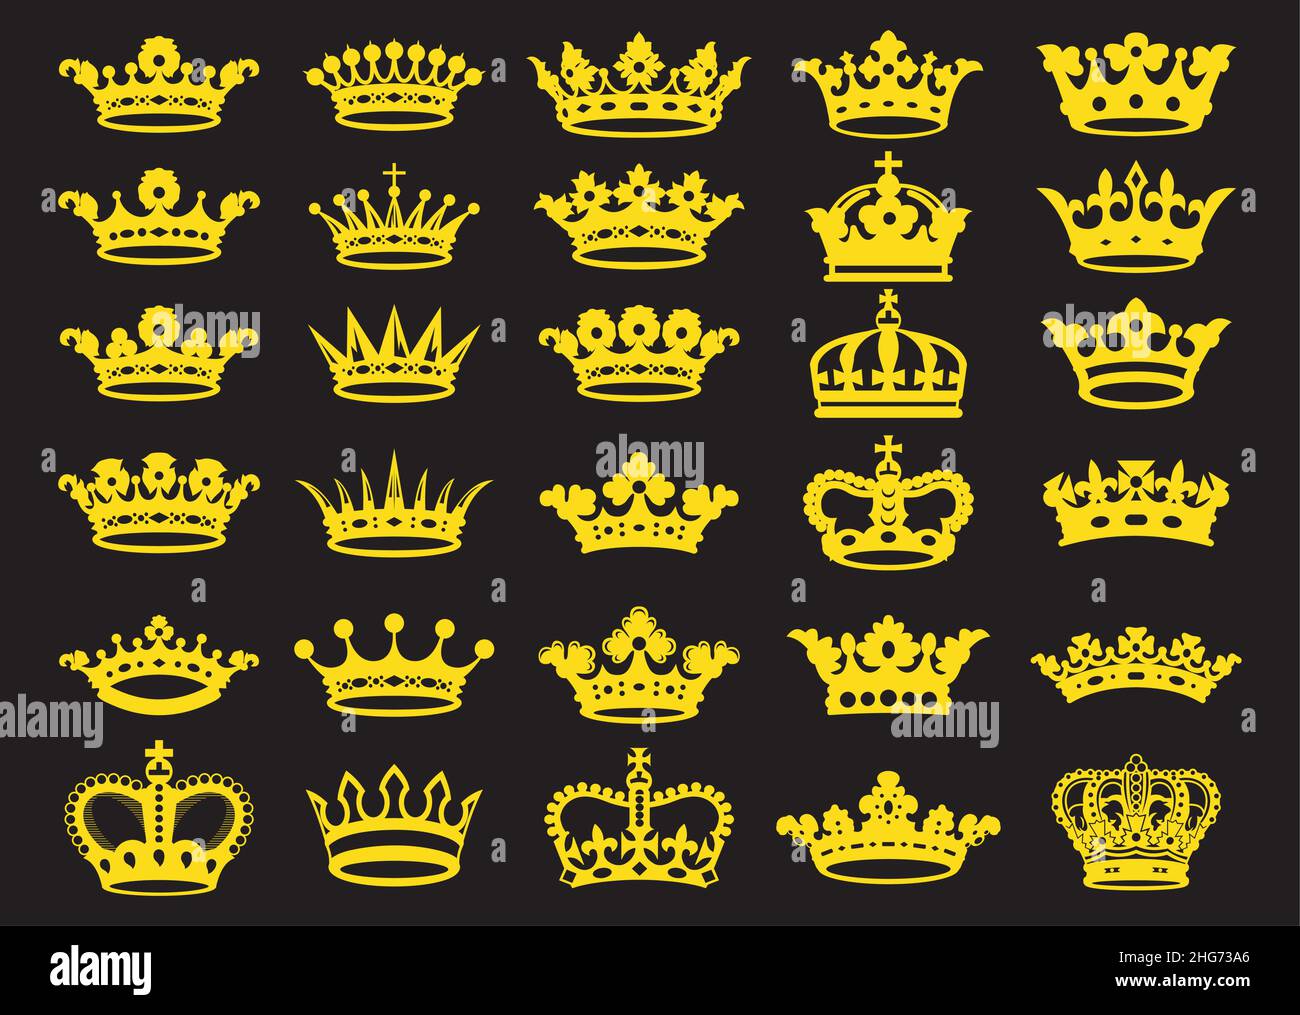 Silhouettes gold crowns set Stock Vector